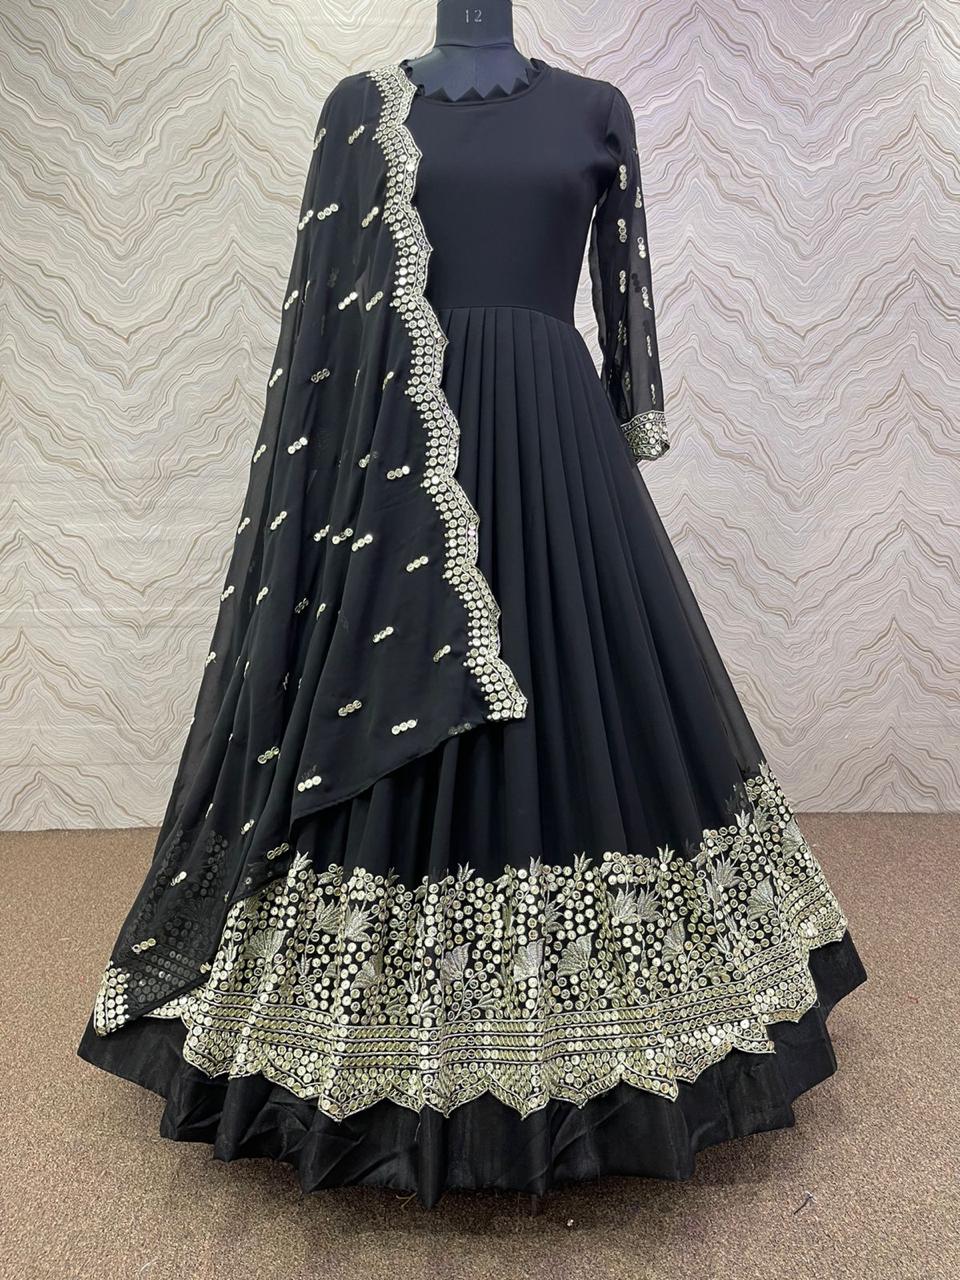 Bunaai - Eternal Color Combinations! ❤️ 🖤 Our Black Tassels Suit Set is  super classy! This monochrome suit set with red tasseled dupatta is  drool-worthy! We refuse to take our eyes off!